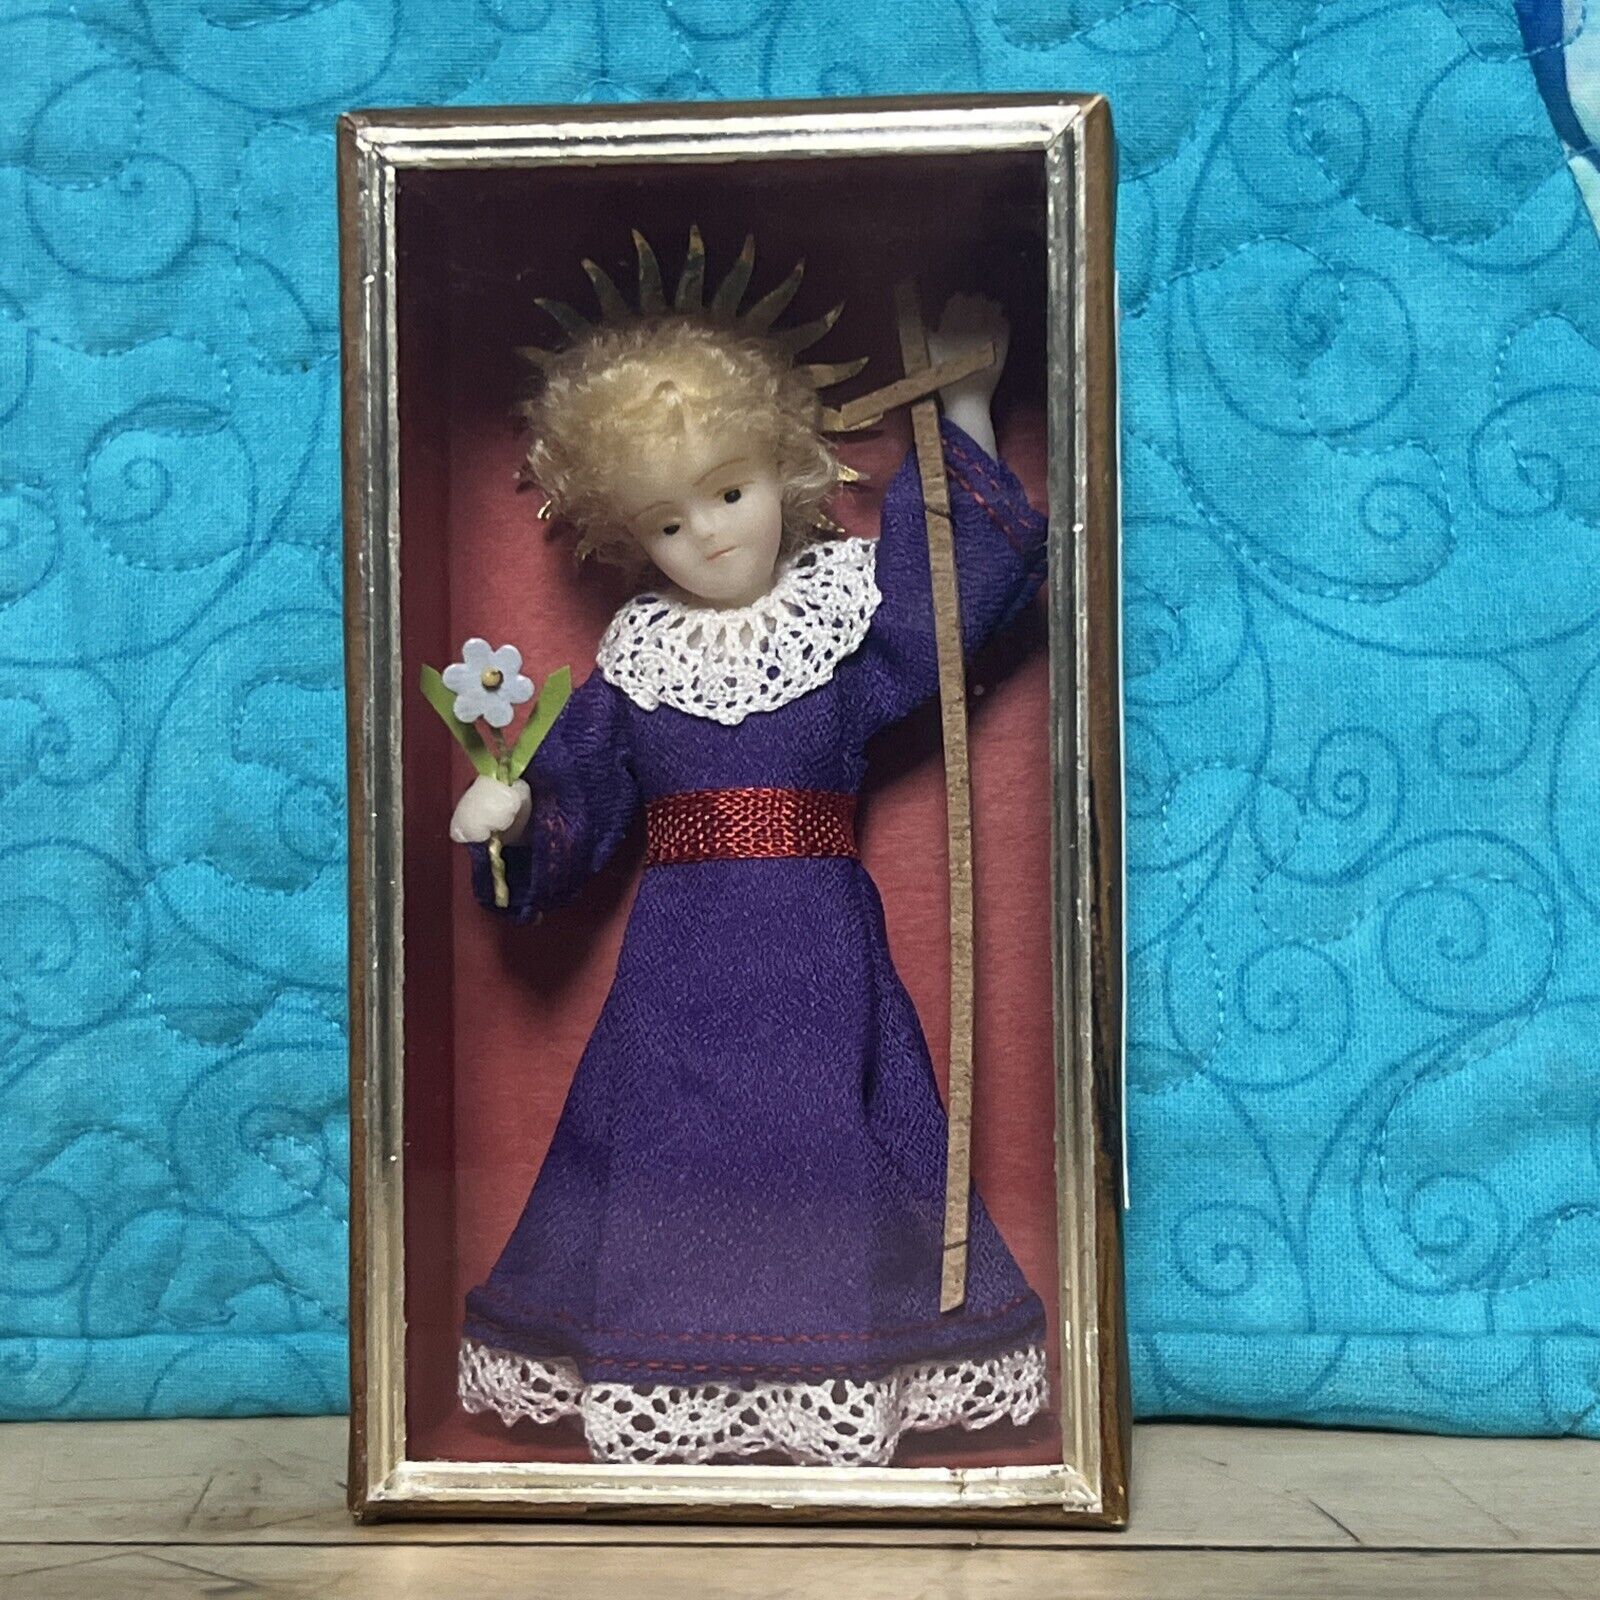 Vintage Our Lady of Loretto Figurine Hand Made in Shadow Box Miniature Small Mar